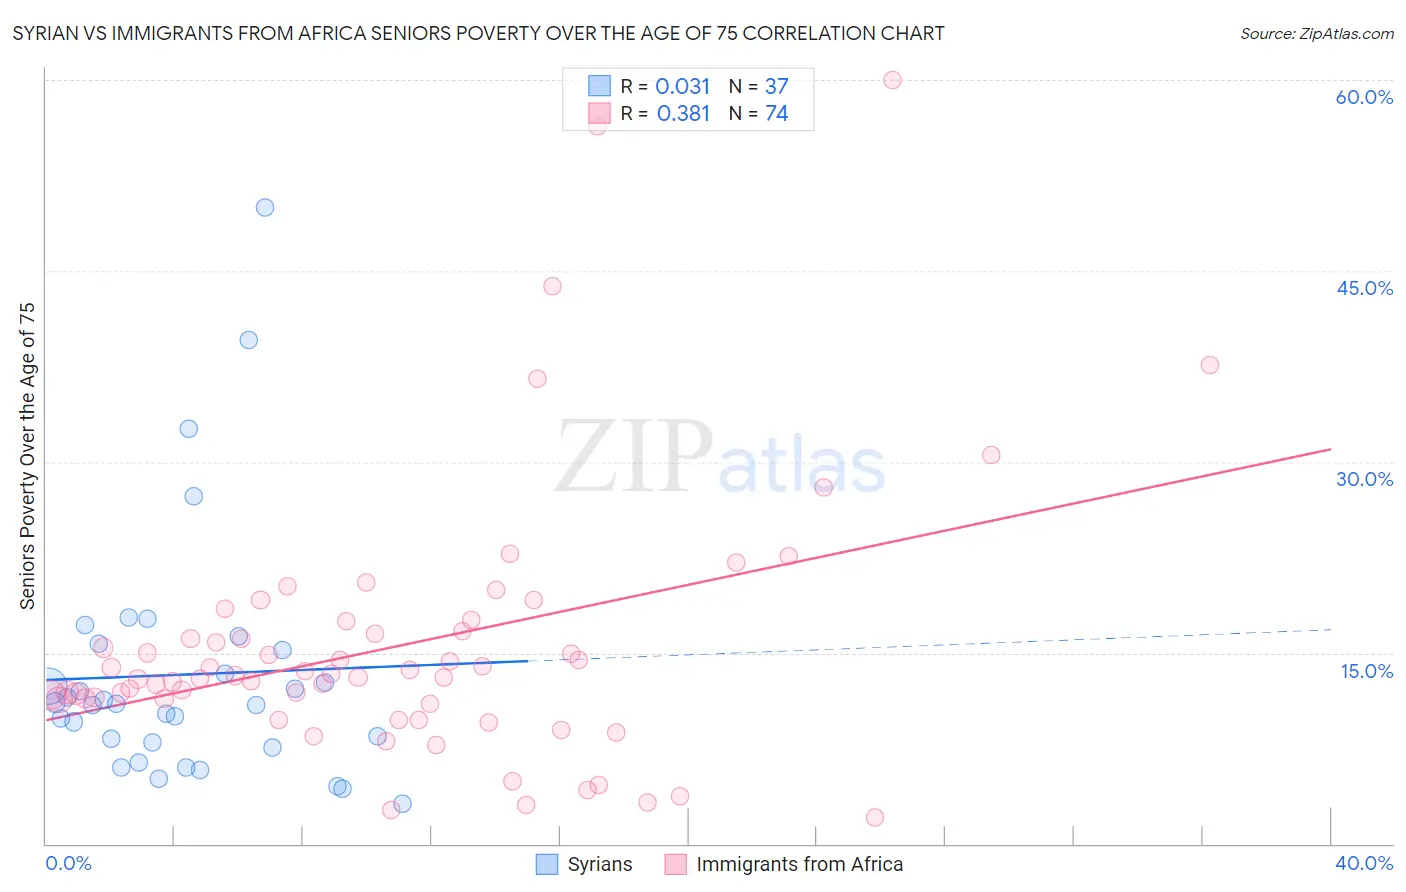 Syrian vs Immigrants from Africa Seniors Poverty Over the Age of 75